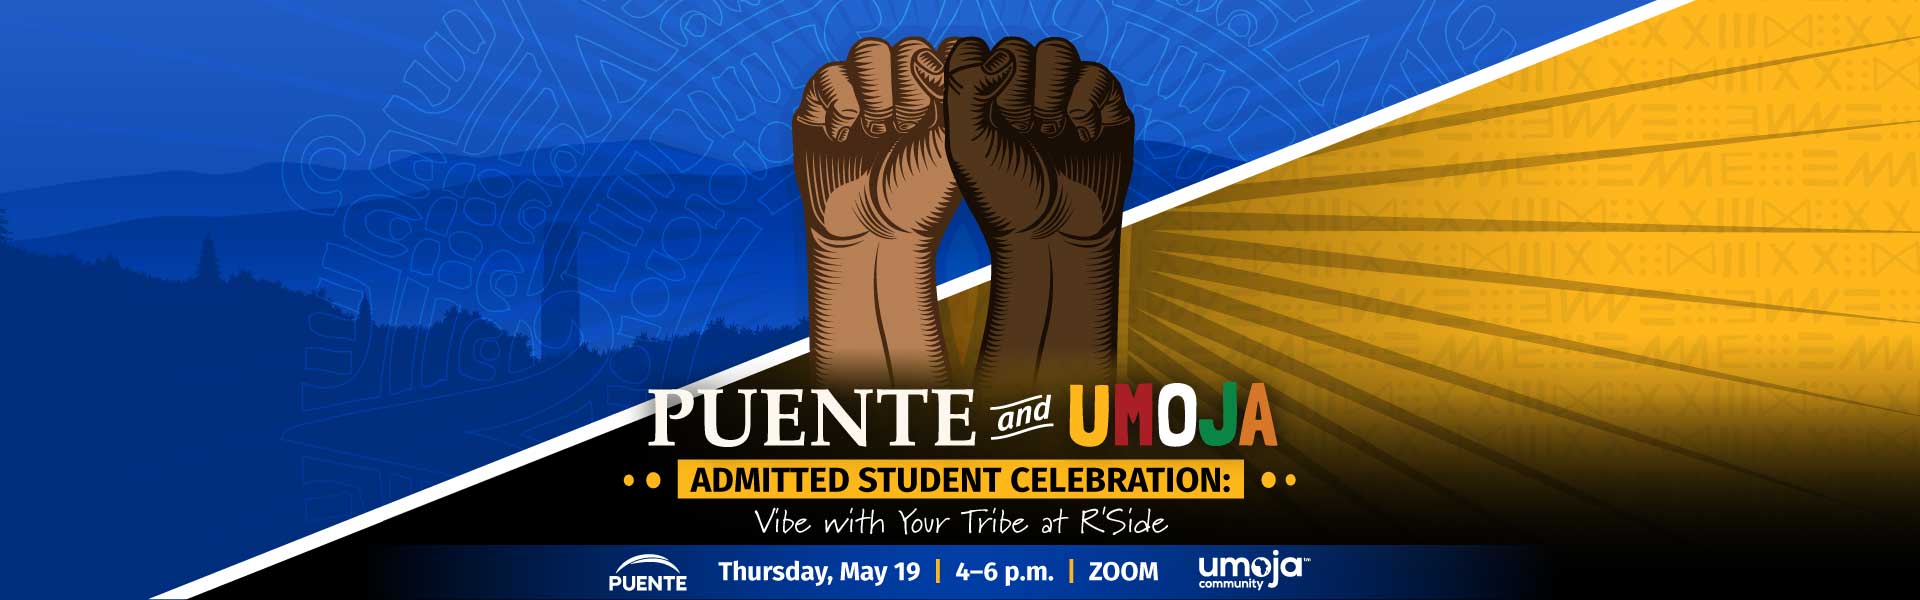 Puente and Umoja Admitted Student Celebration: Vibe with your Tribe at R'side